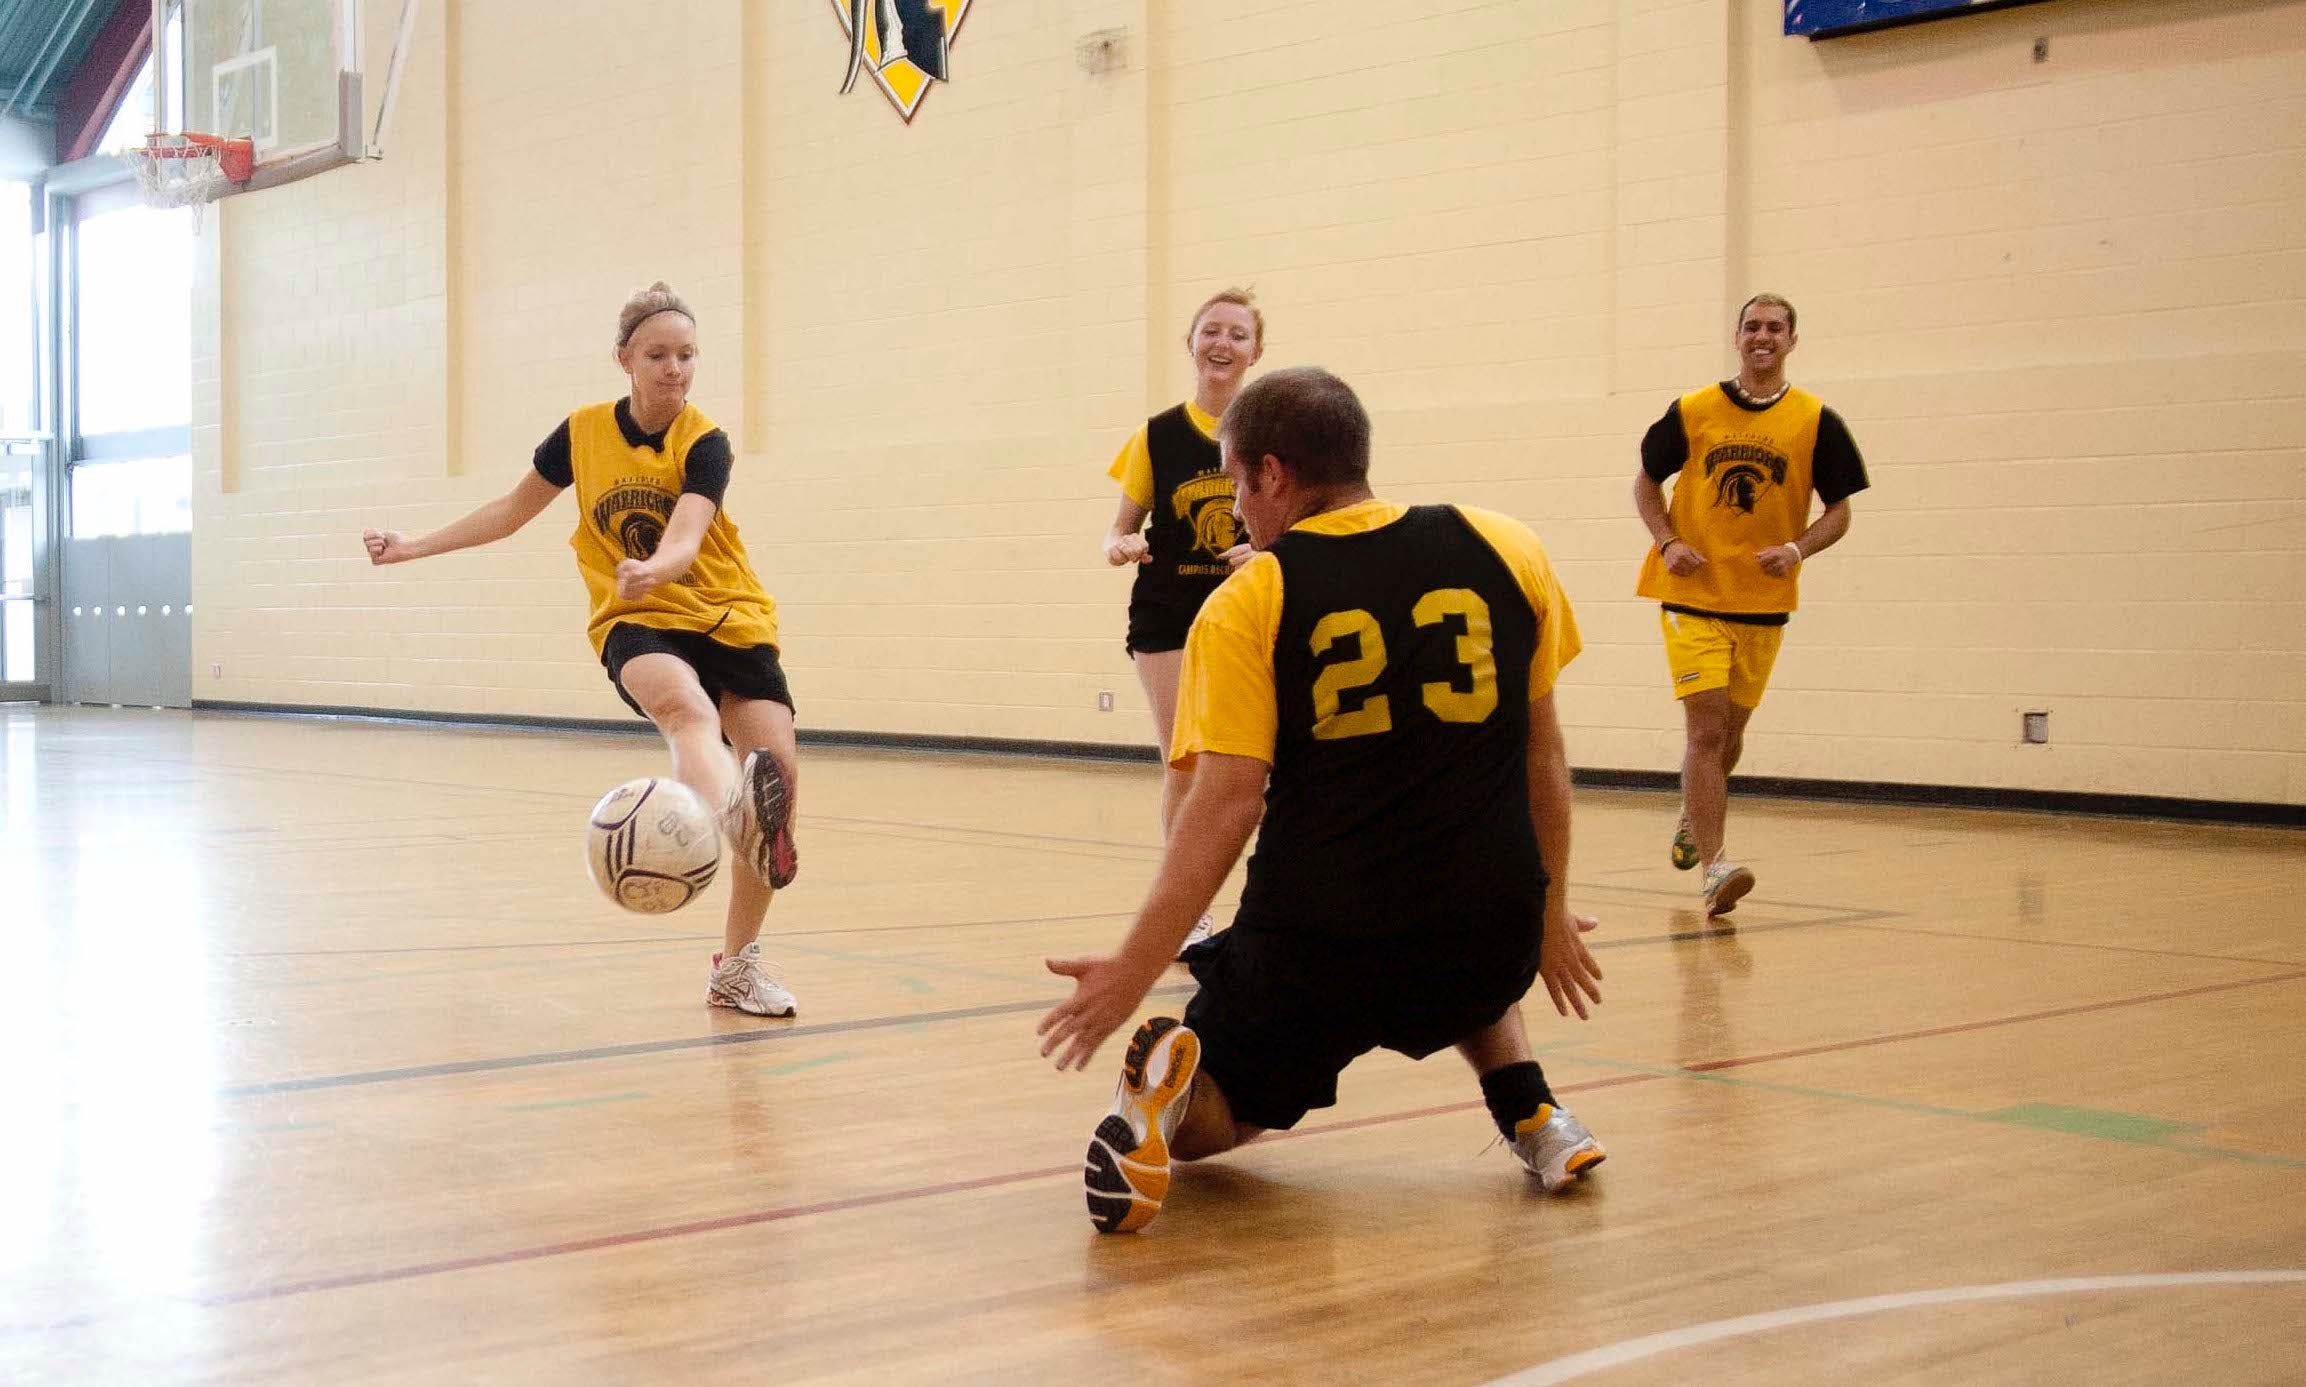 Students playing indoor soccer